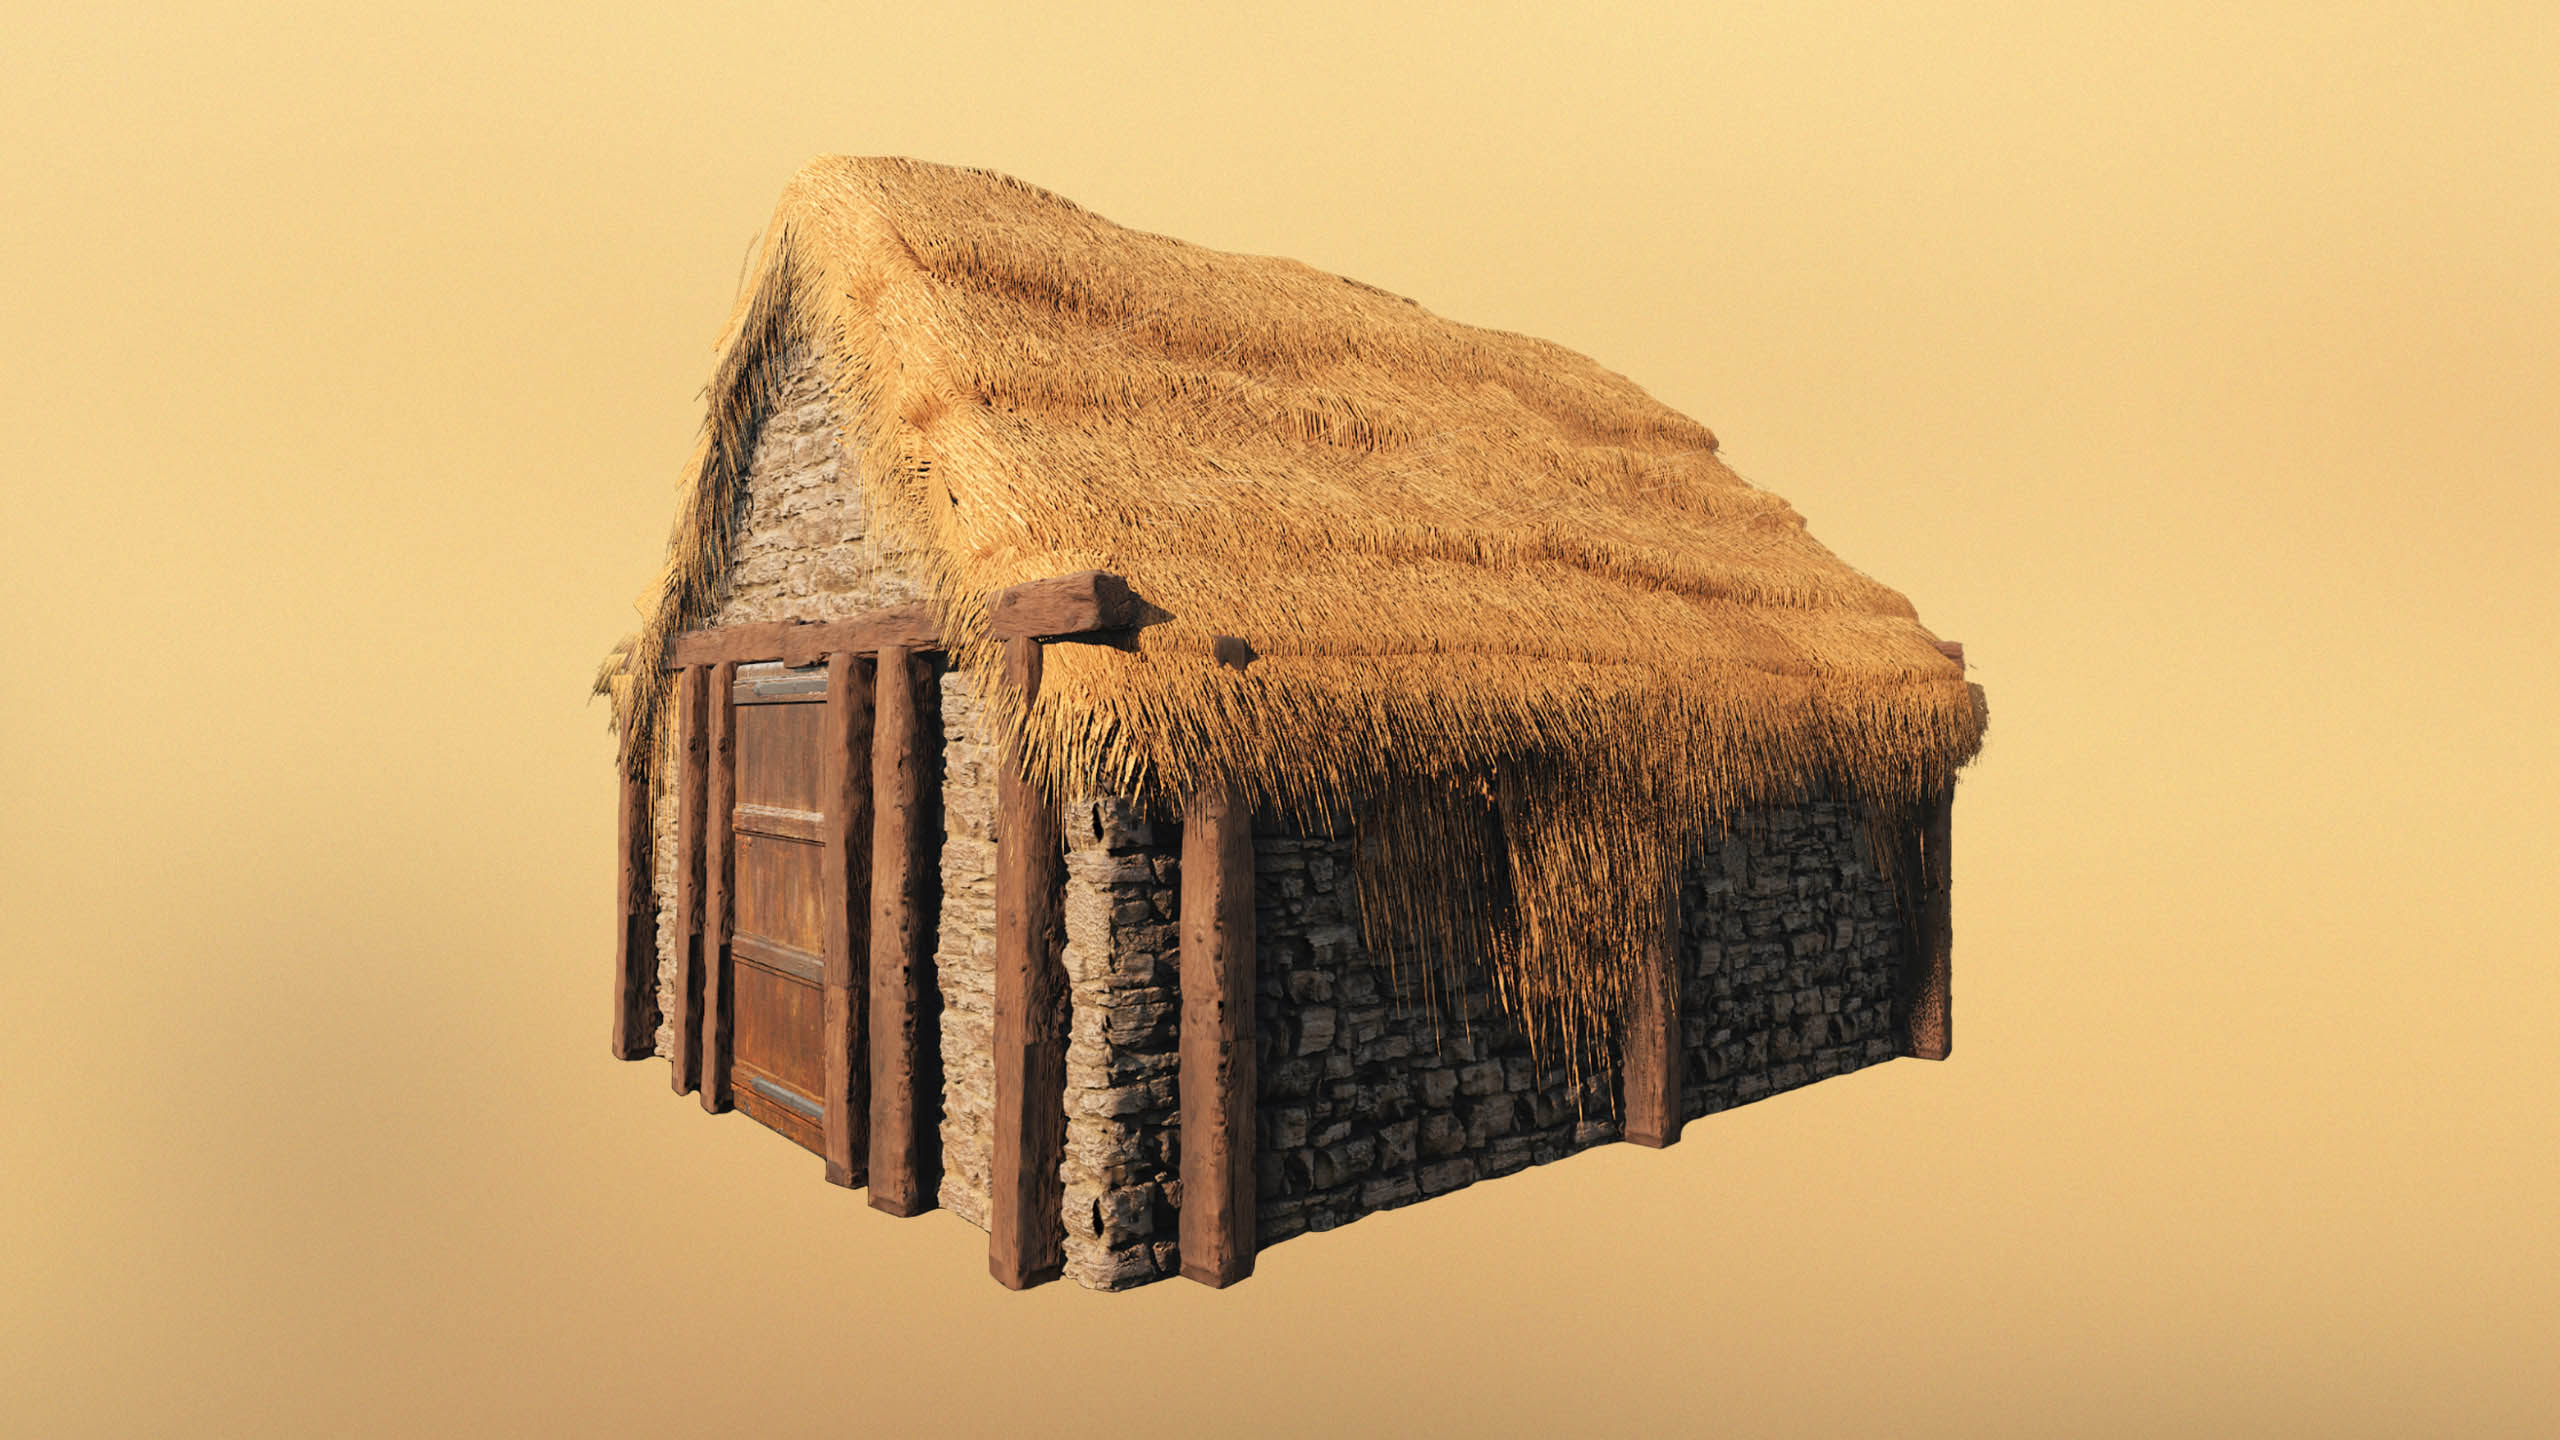 Creating a thatched roof.